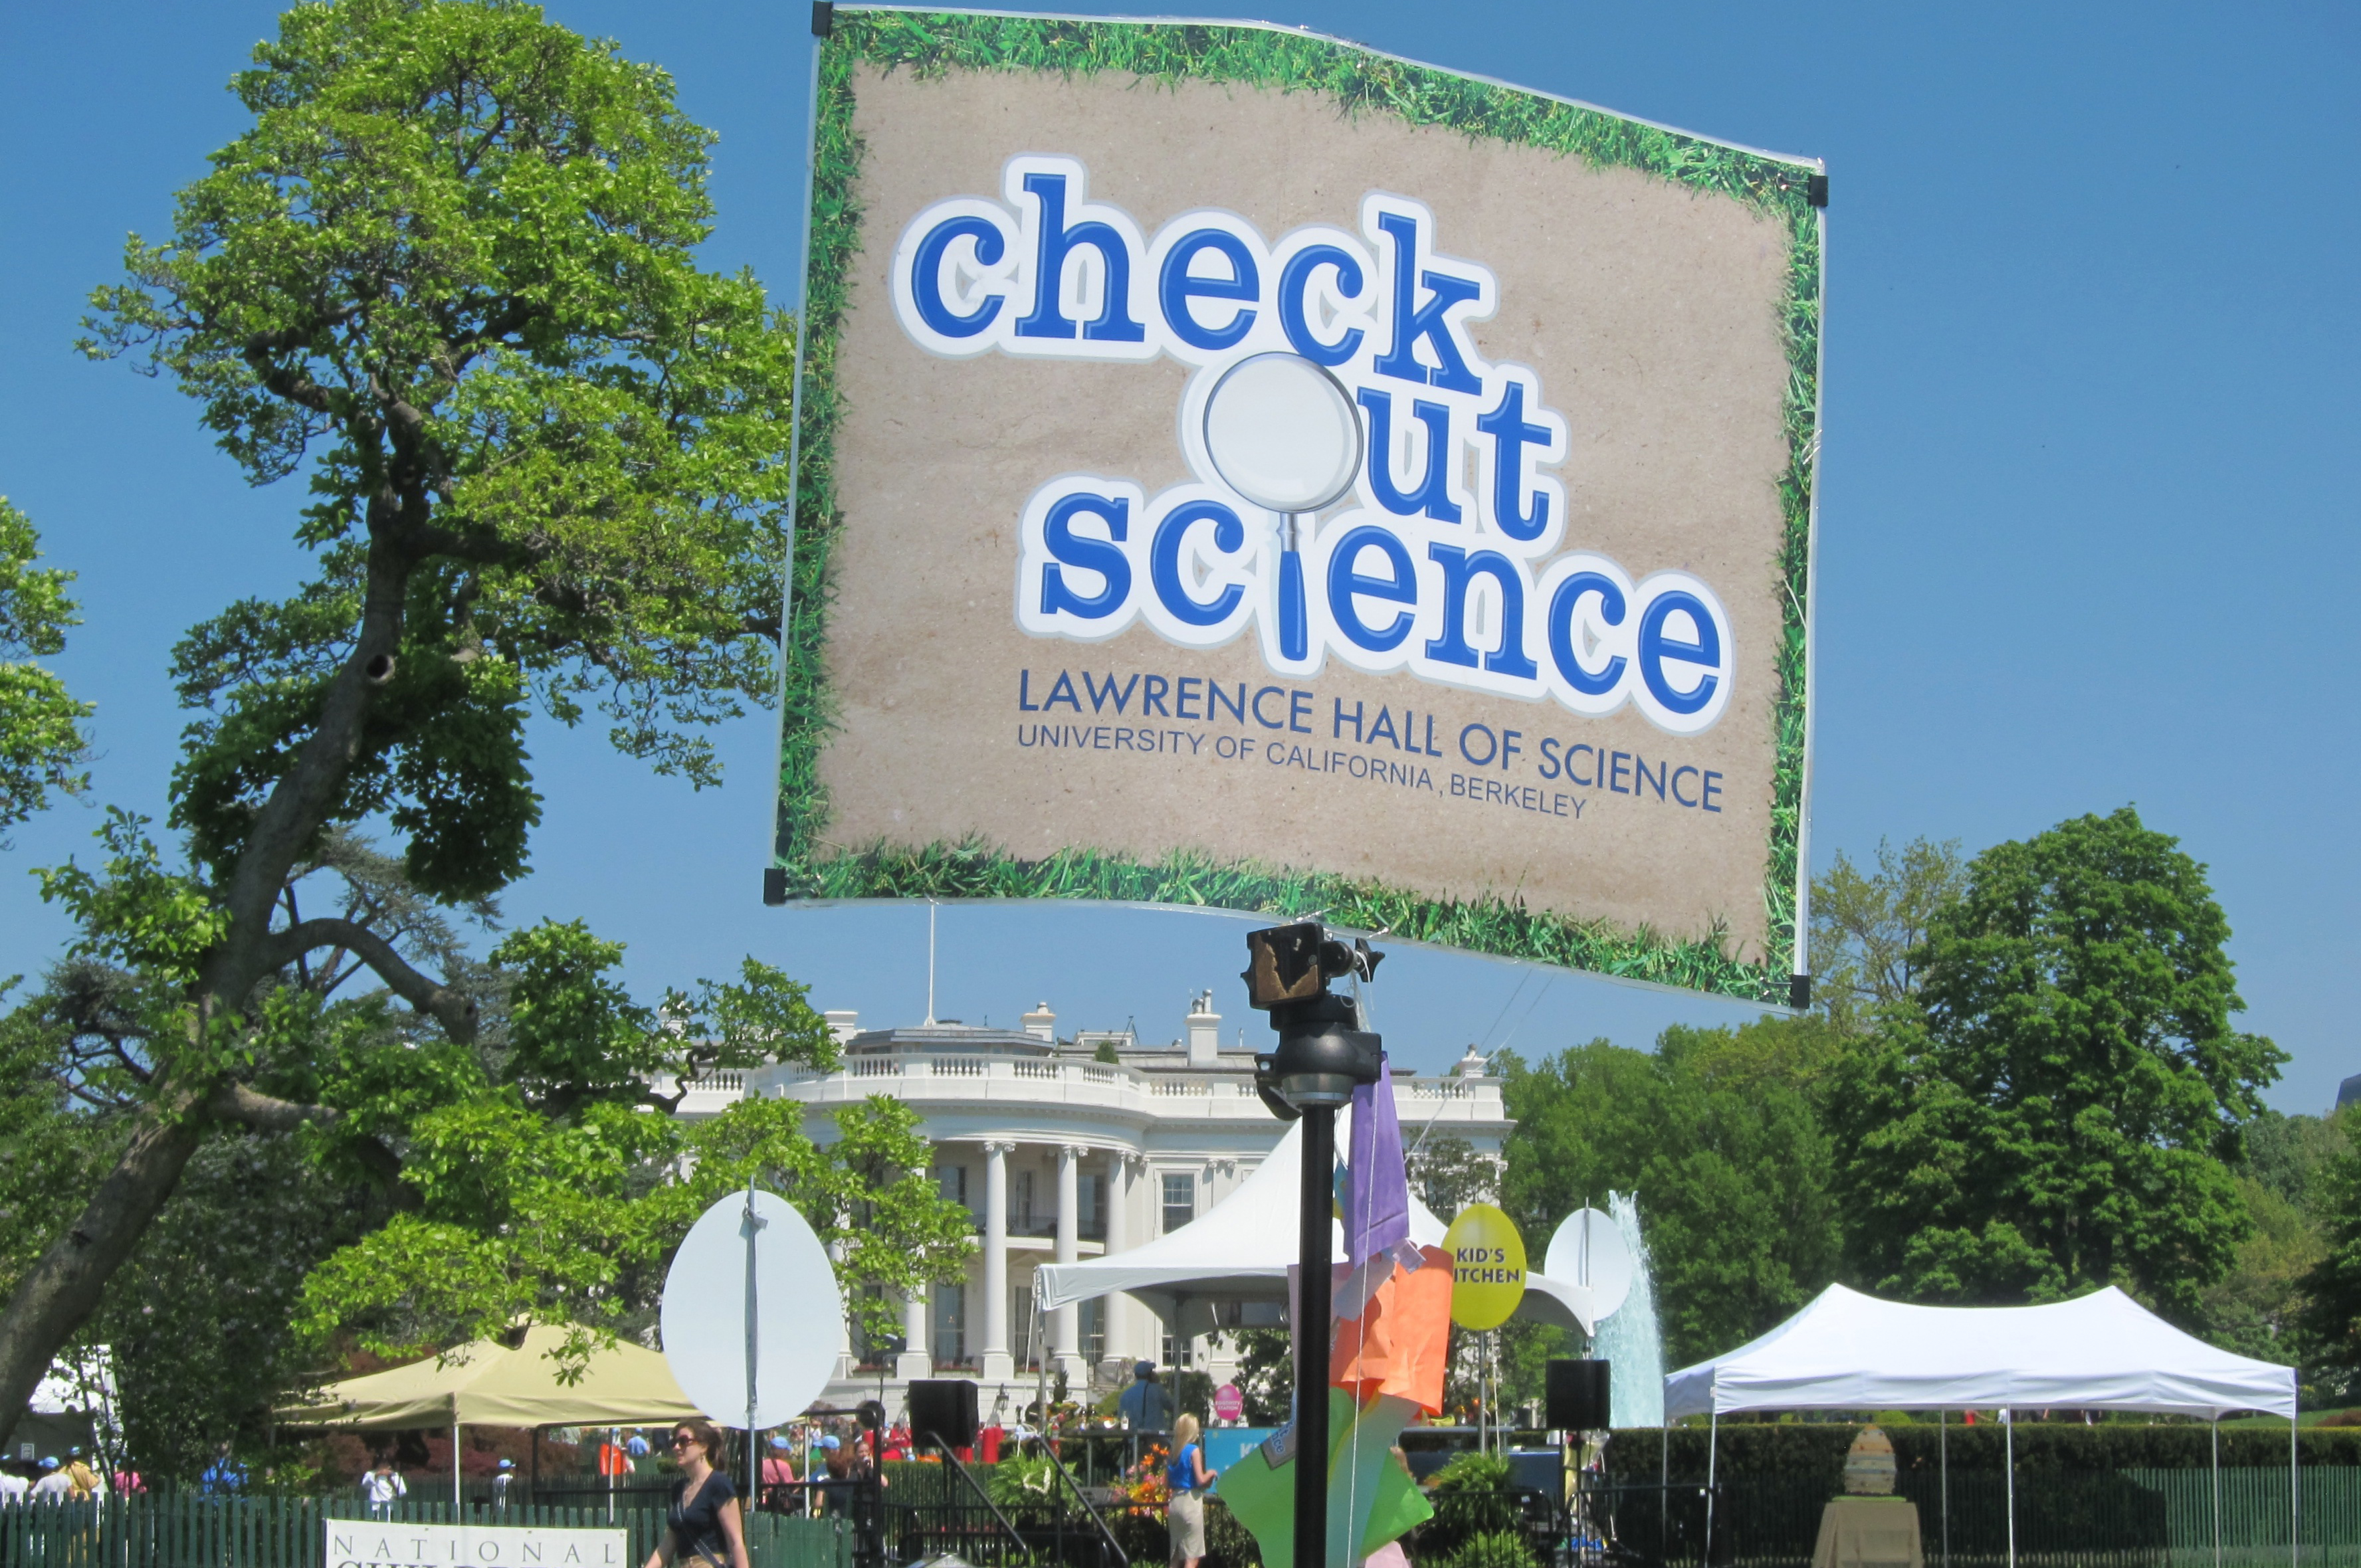 EER Check Out Science